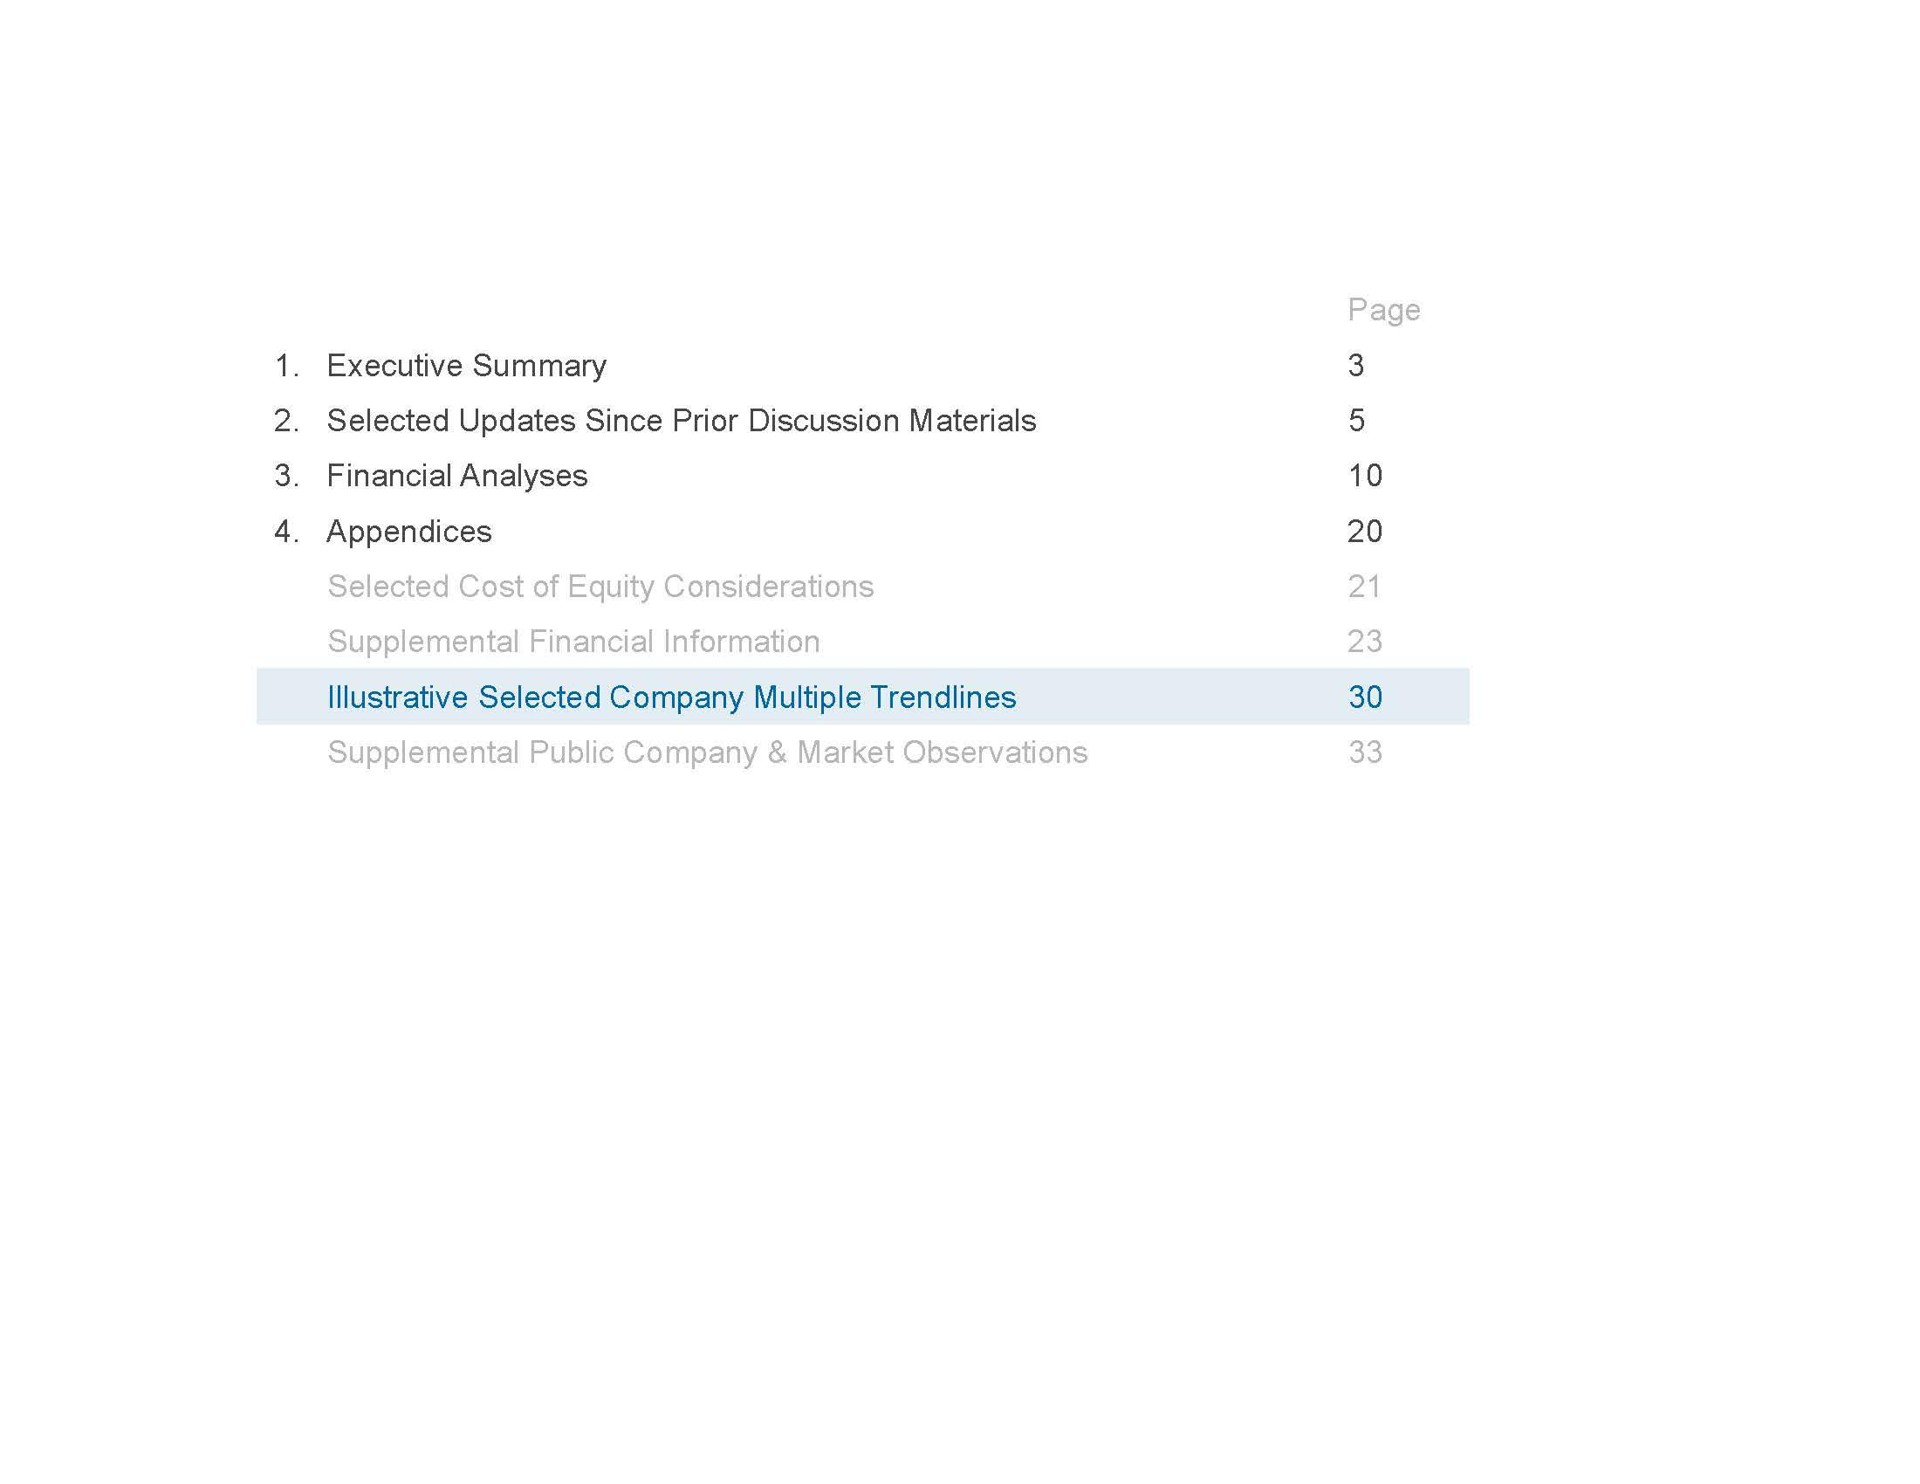 executive summary financial analyses selected updates since prior discussion materials appendices illustrative selected company multiple | Houlihan Lokey